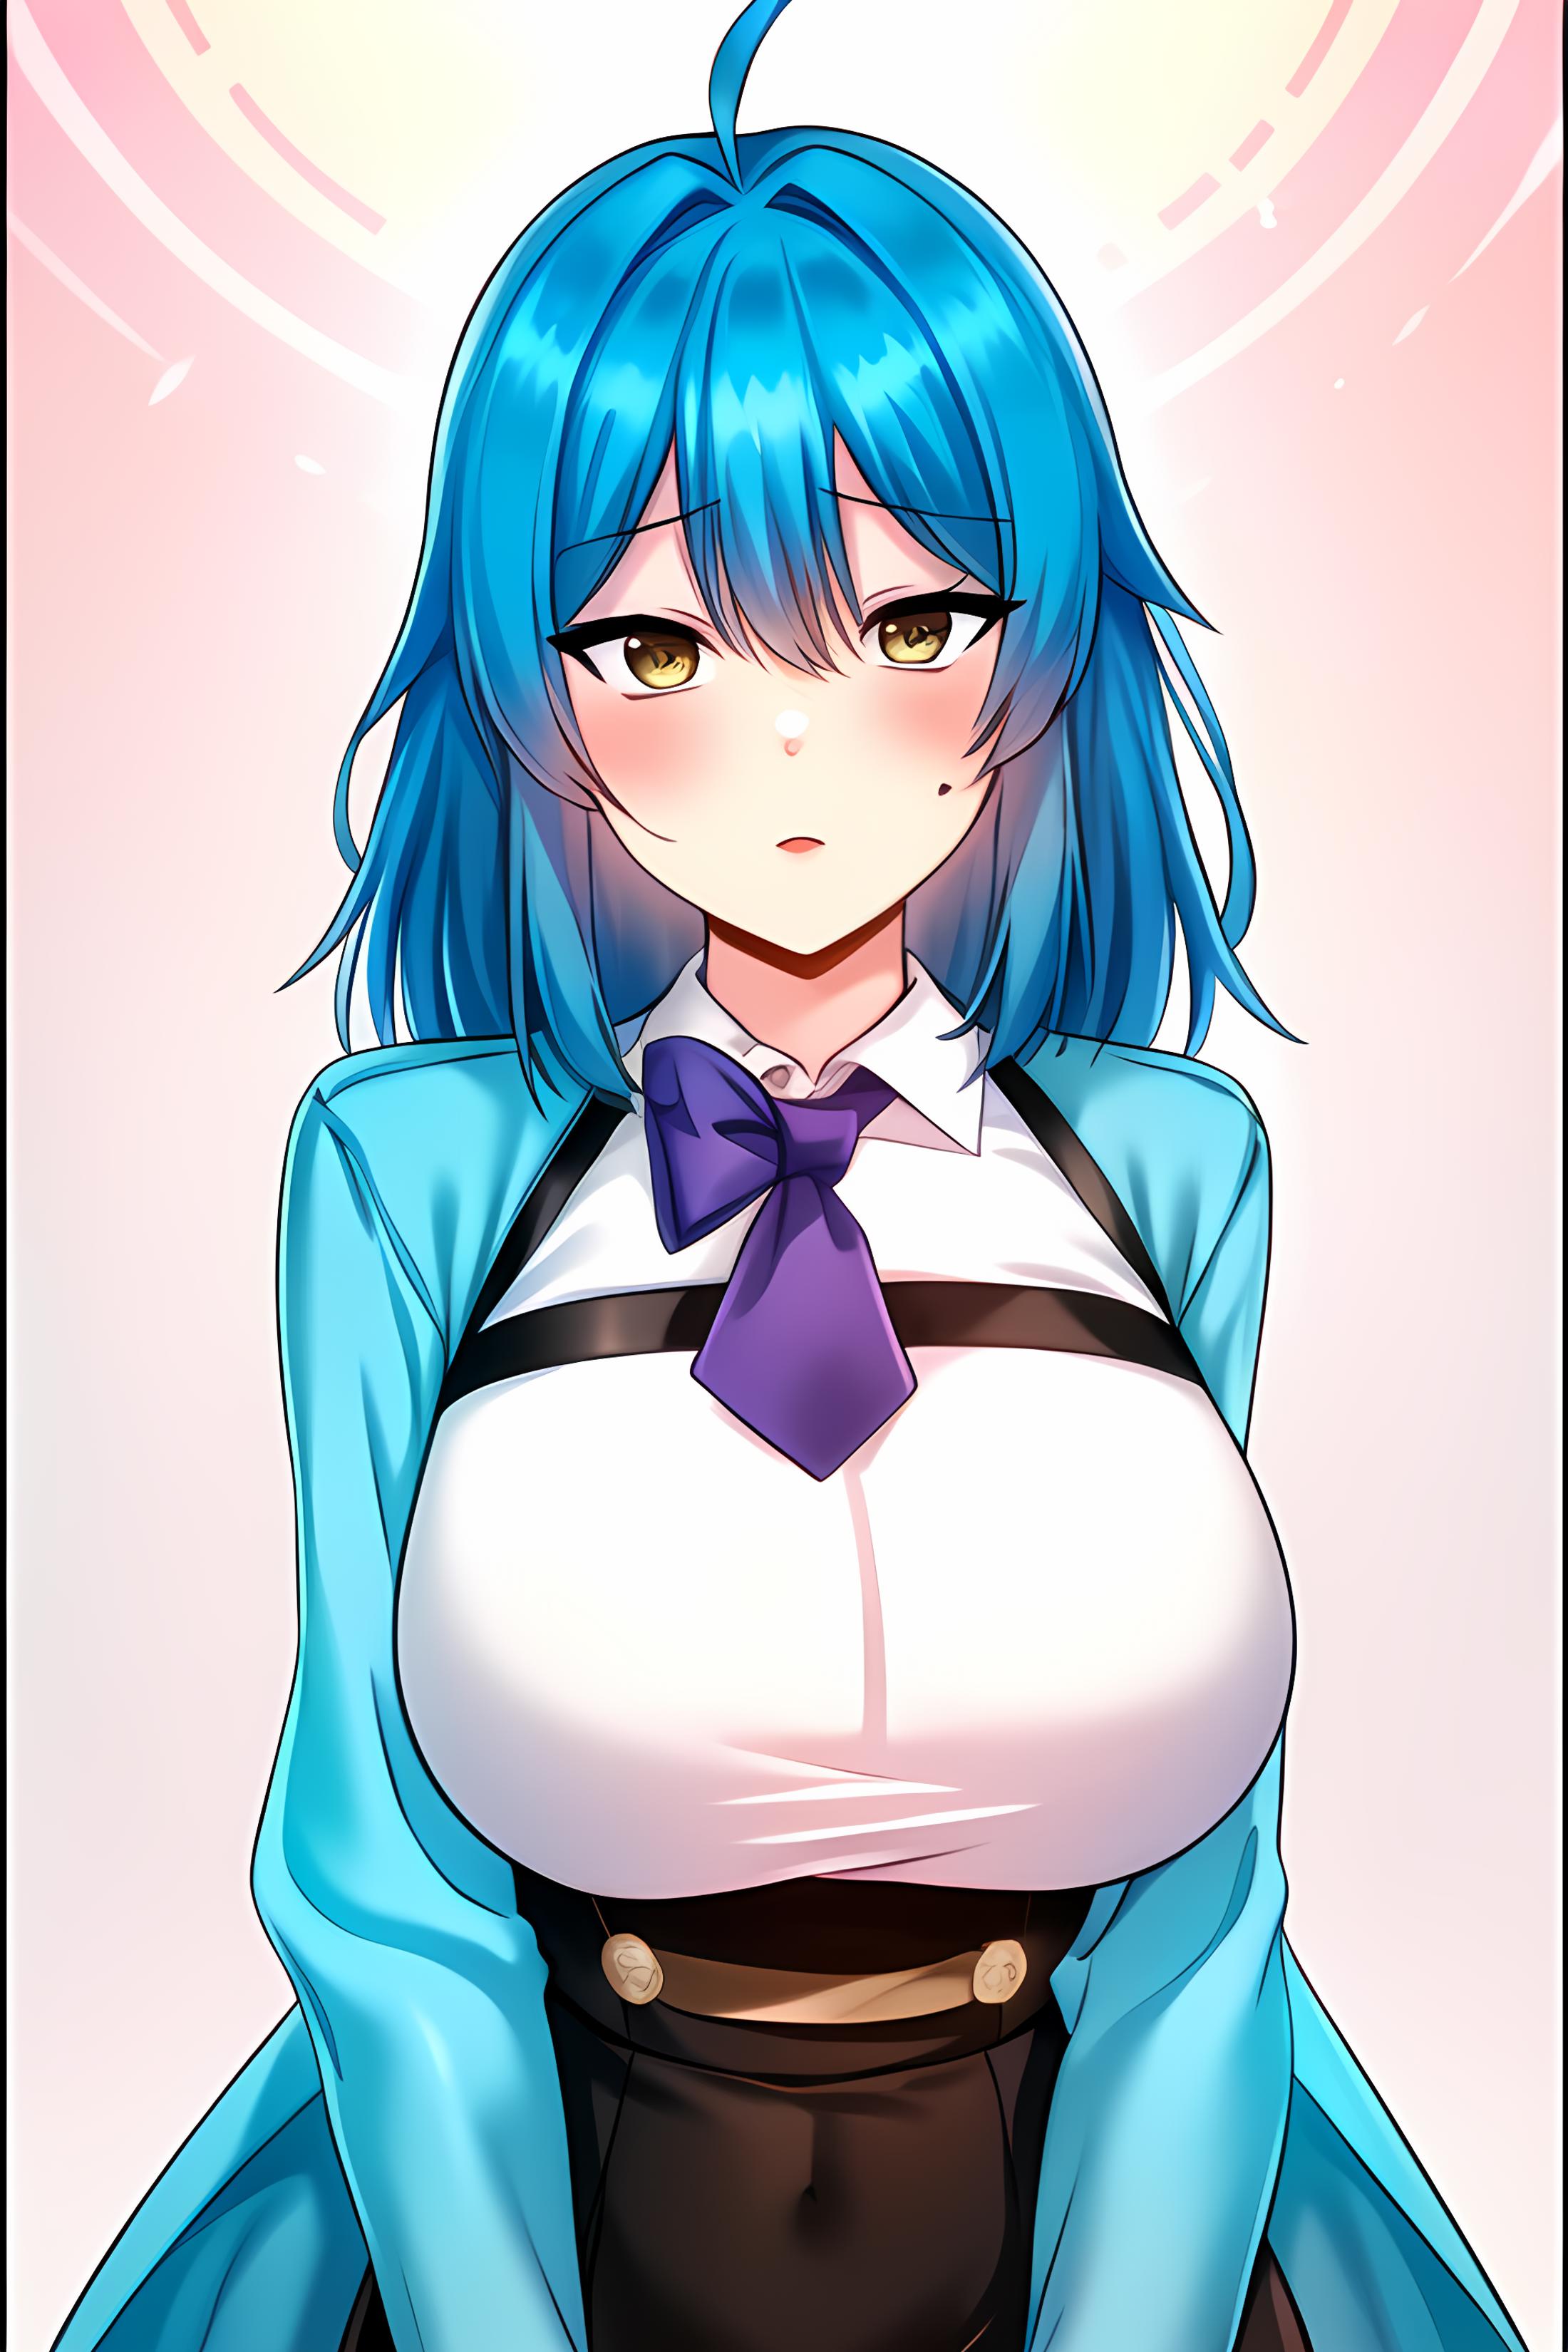 Lucy (Trapped in the Academy’s Eroge) image by Nena